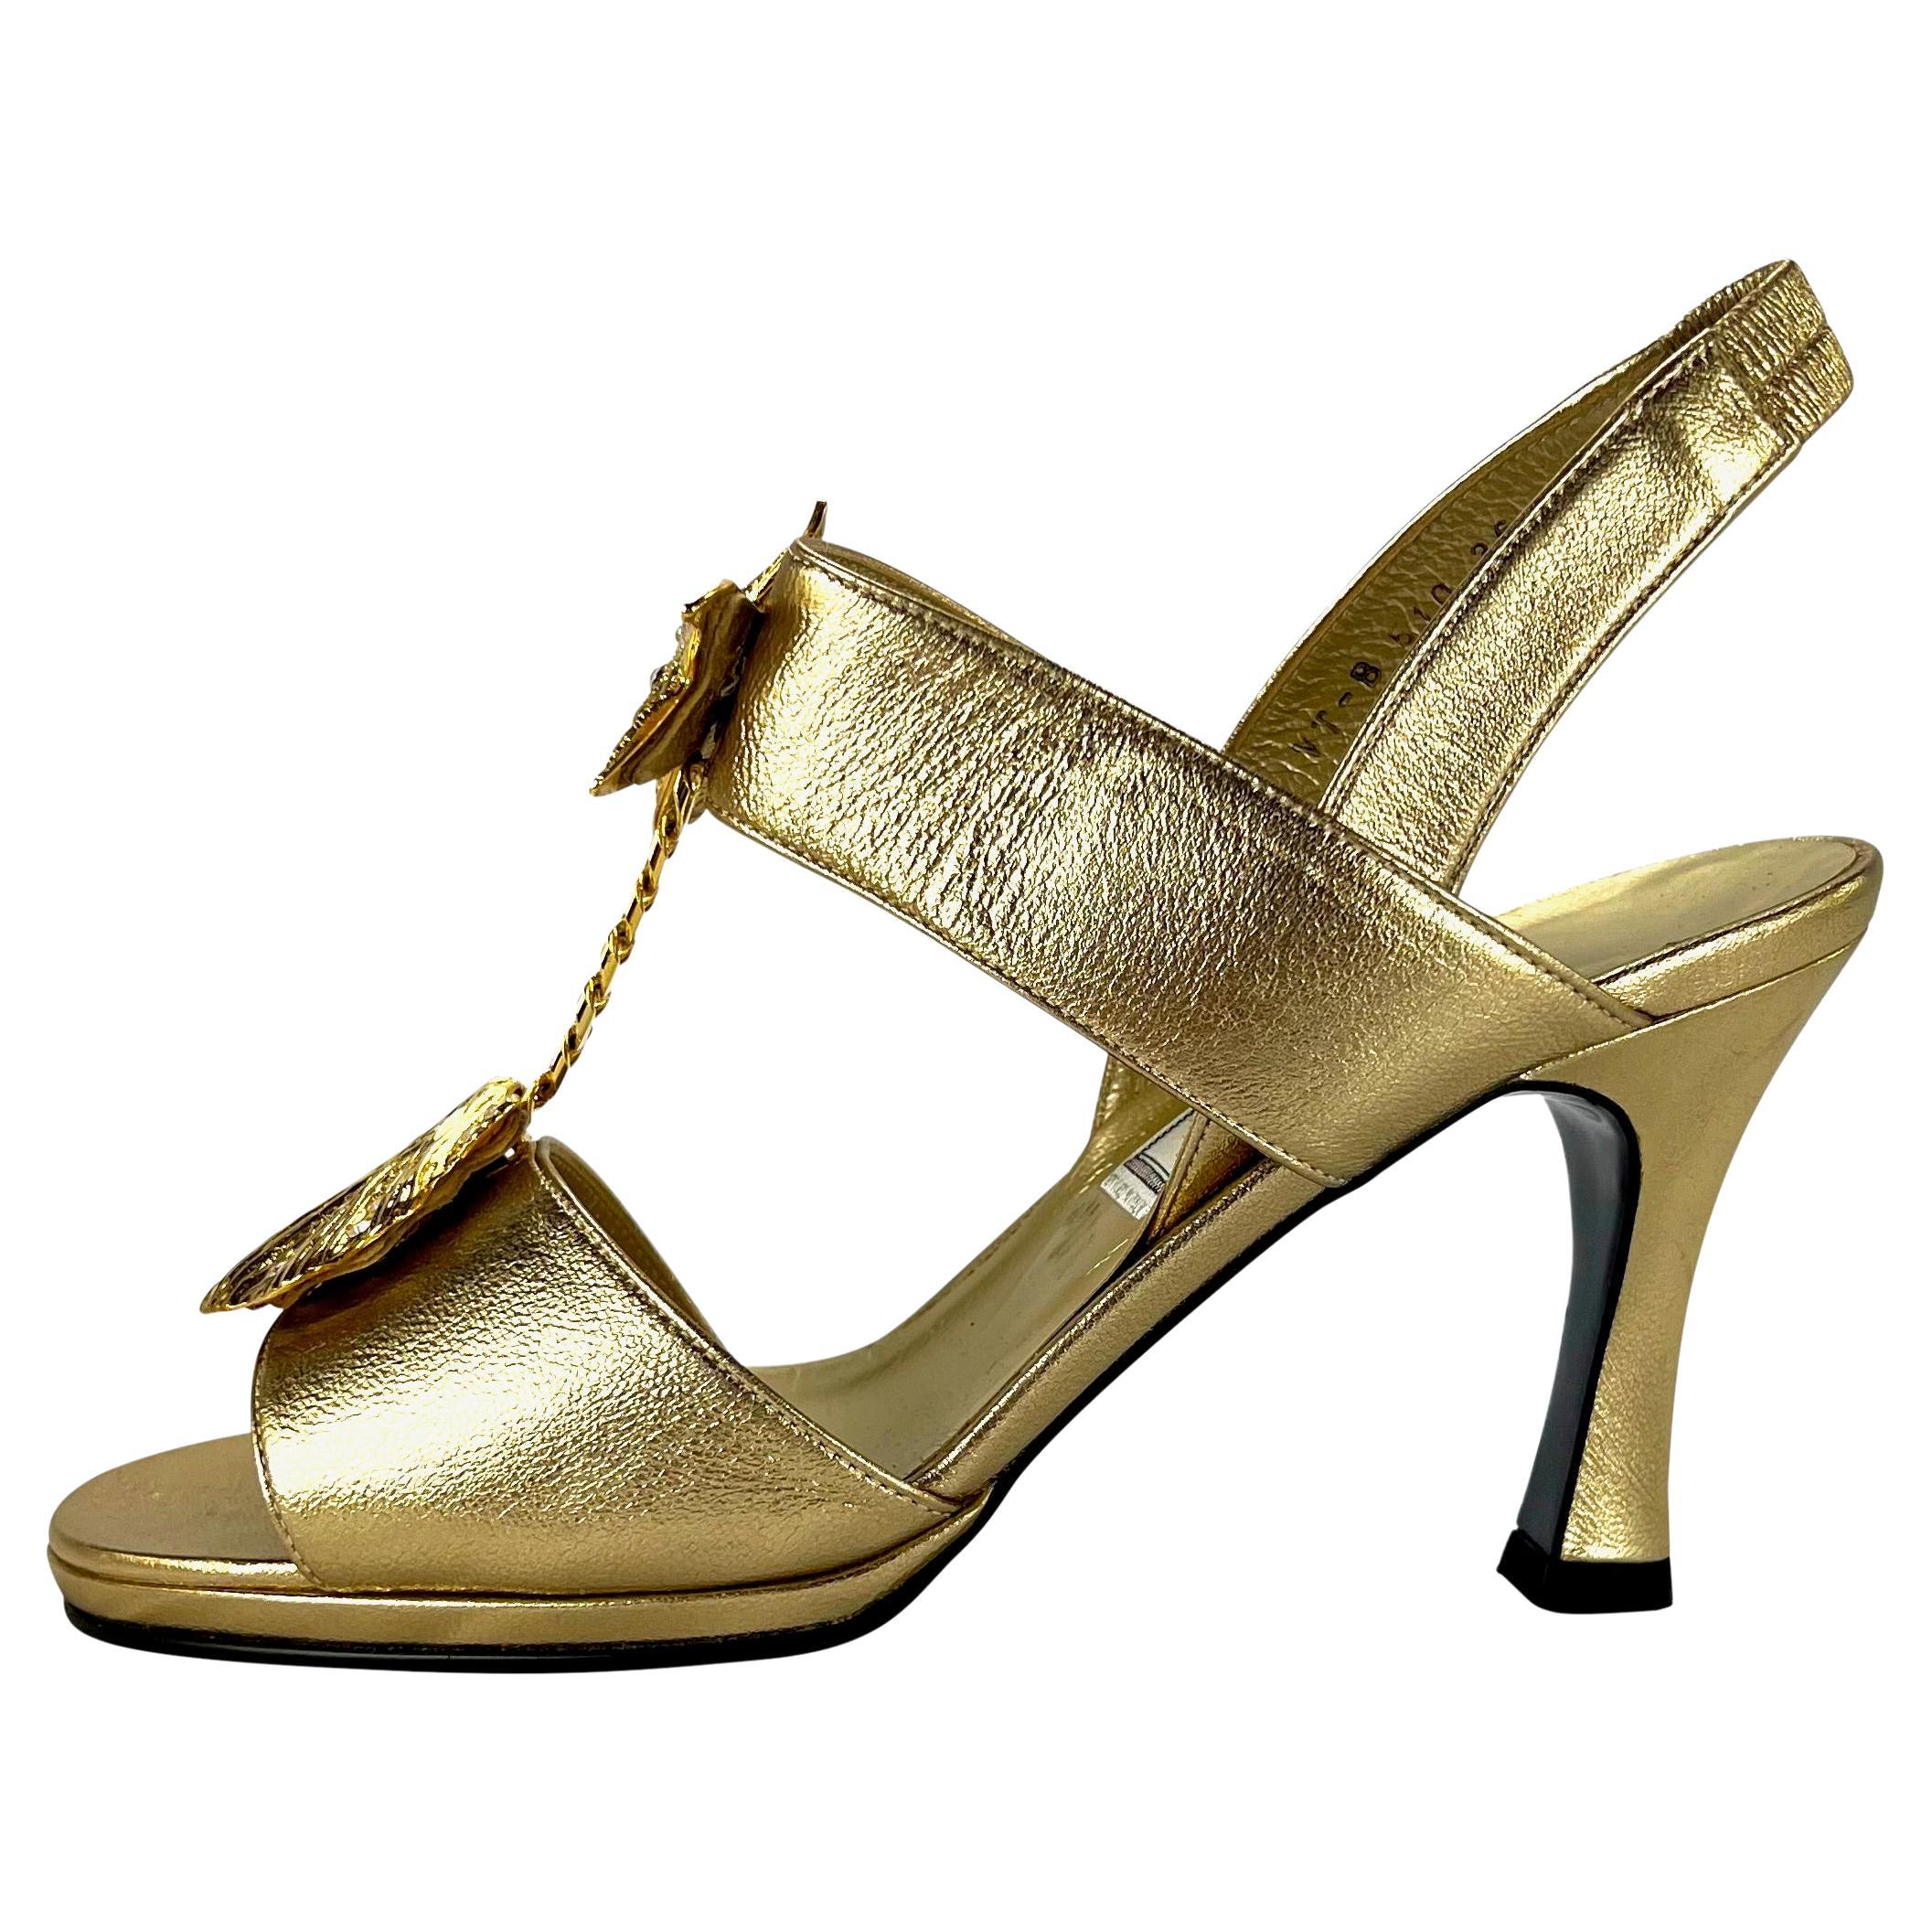 Presenting a pair of gold Gianni Versace Mare motif sandal heels, designed by Gianni Versace. From the Spring/Summer 1992 collection, similar gold heels debuted on the season's runway. This fabulous pair of heels features gold leather straps and are